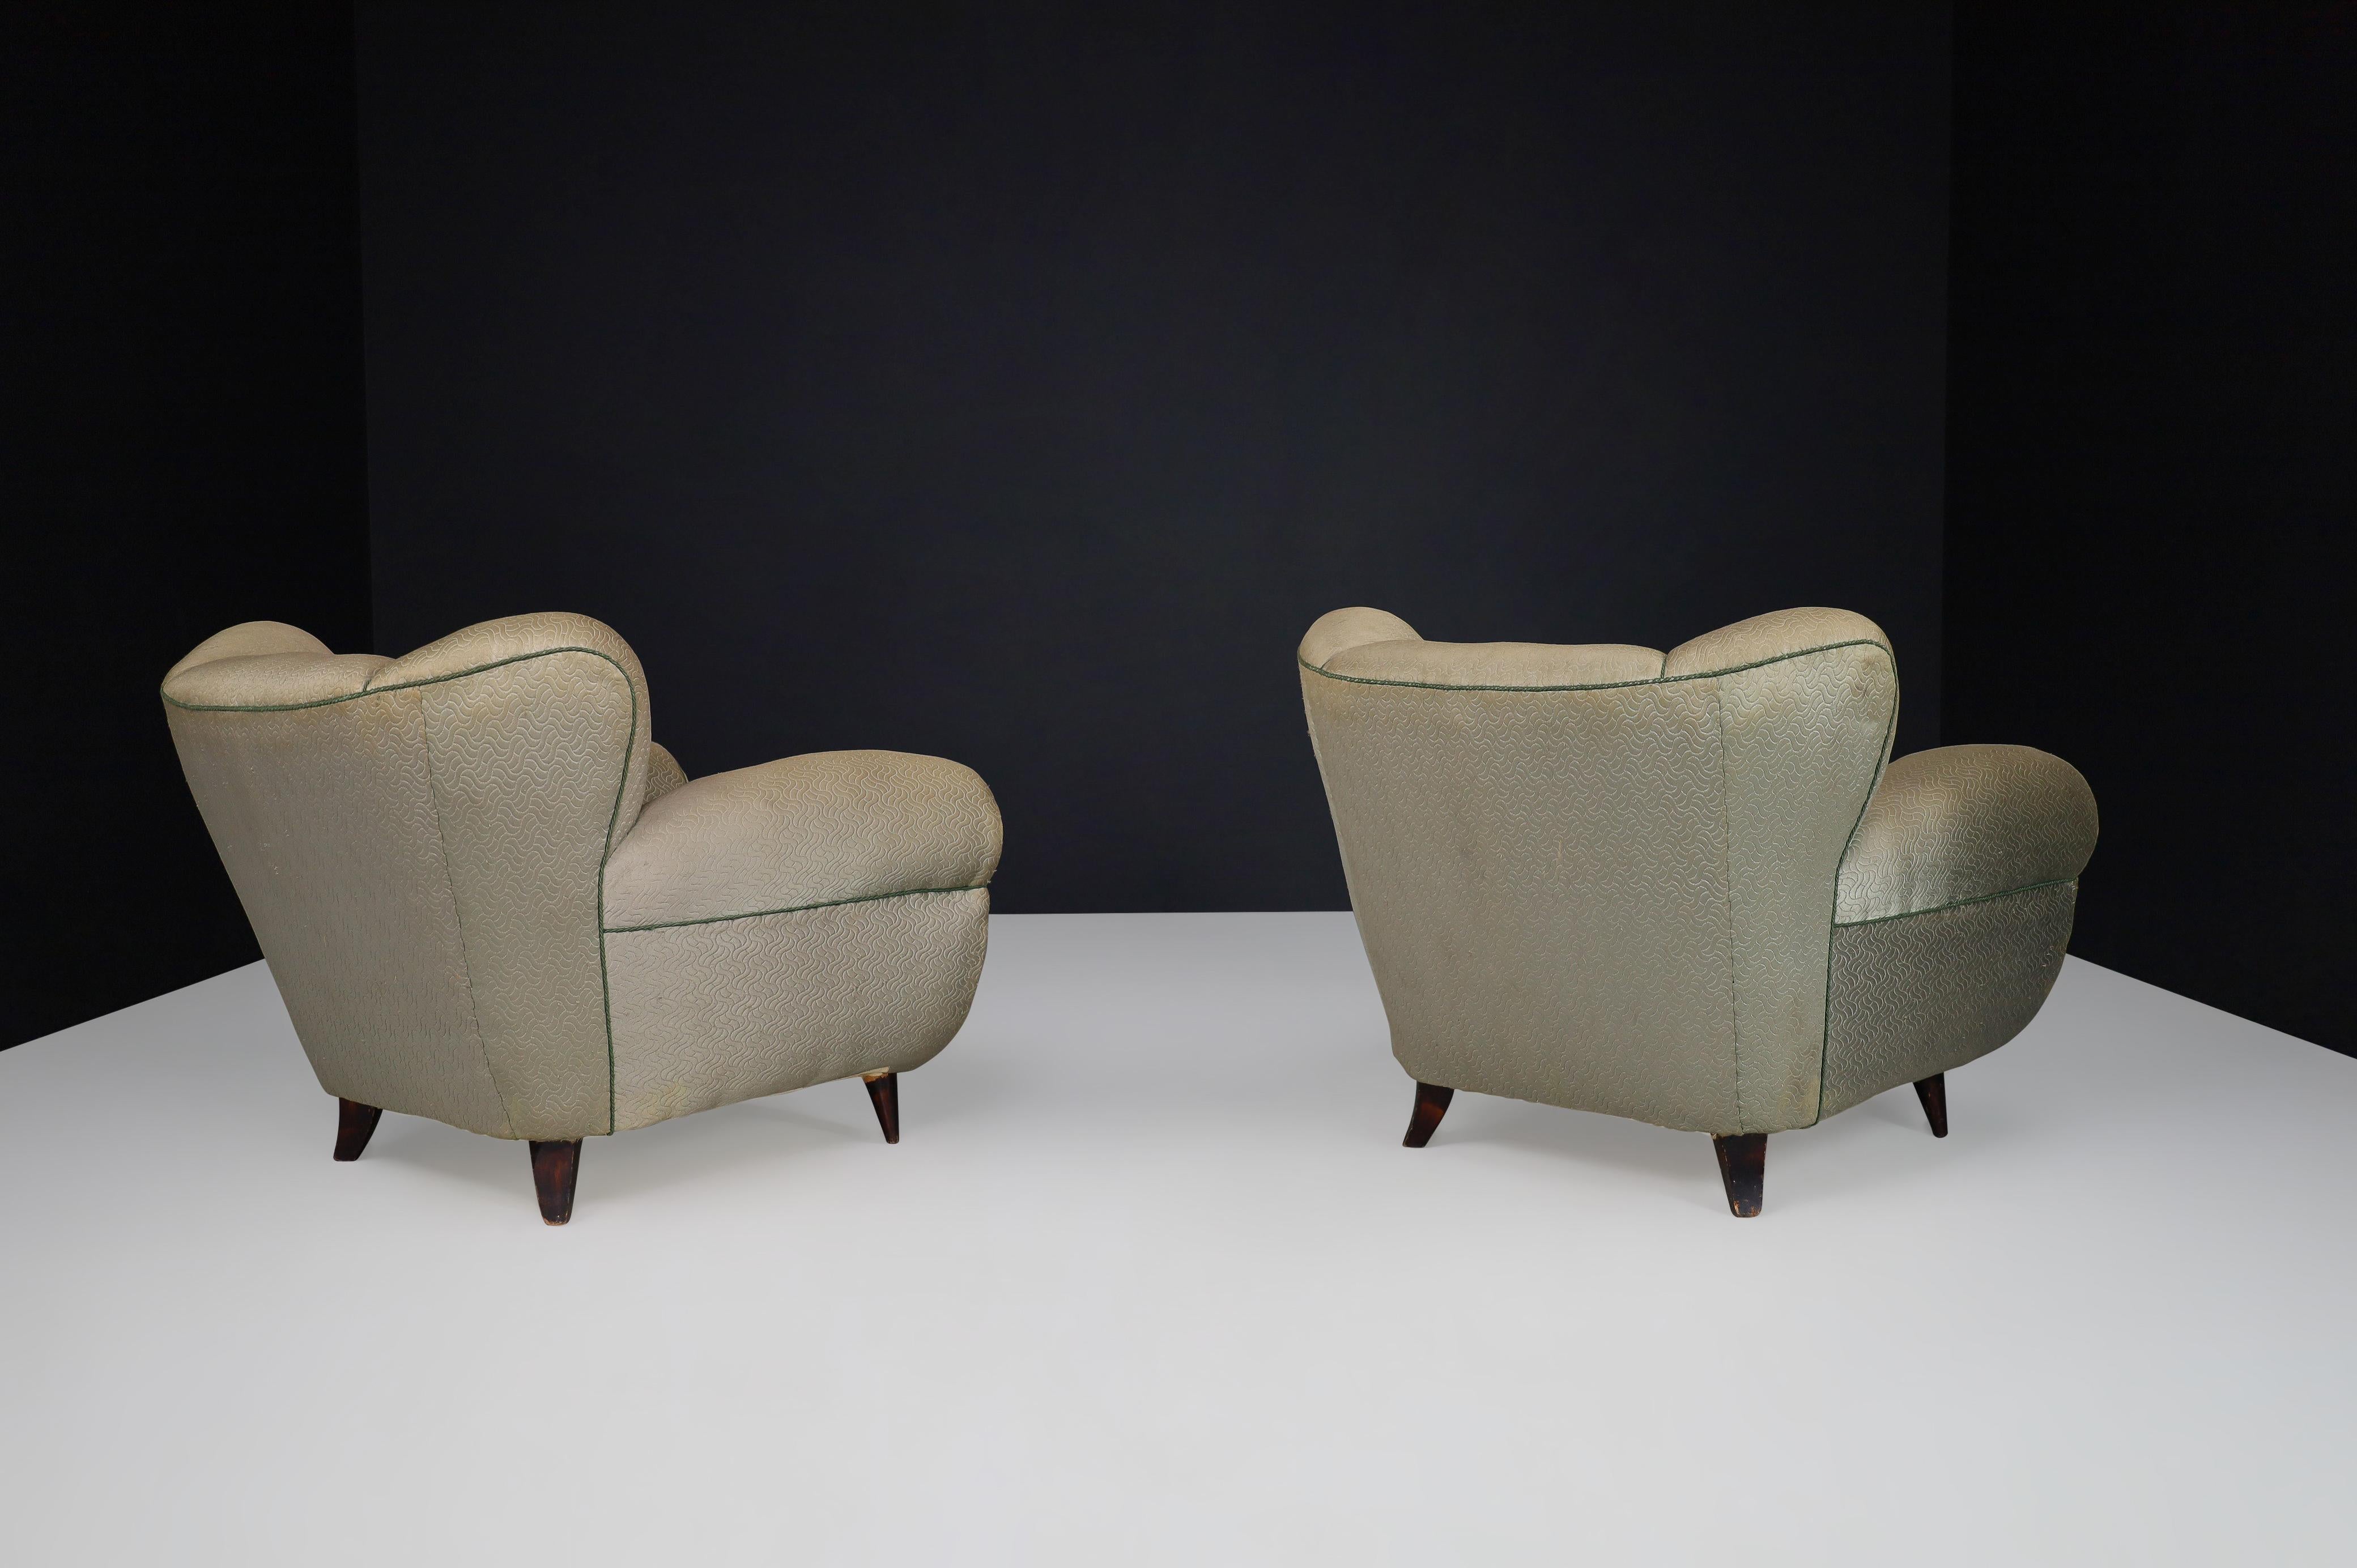 Uglielmo Ulrich Art Deco Lounge Chairs in Original Fabric, Italy 1930s For Sale 7